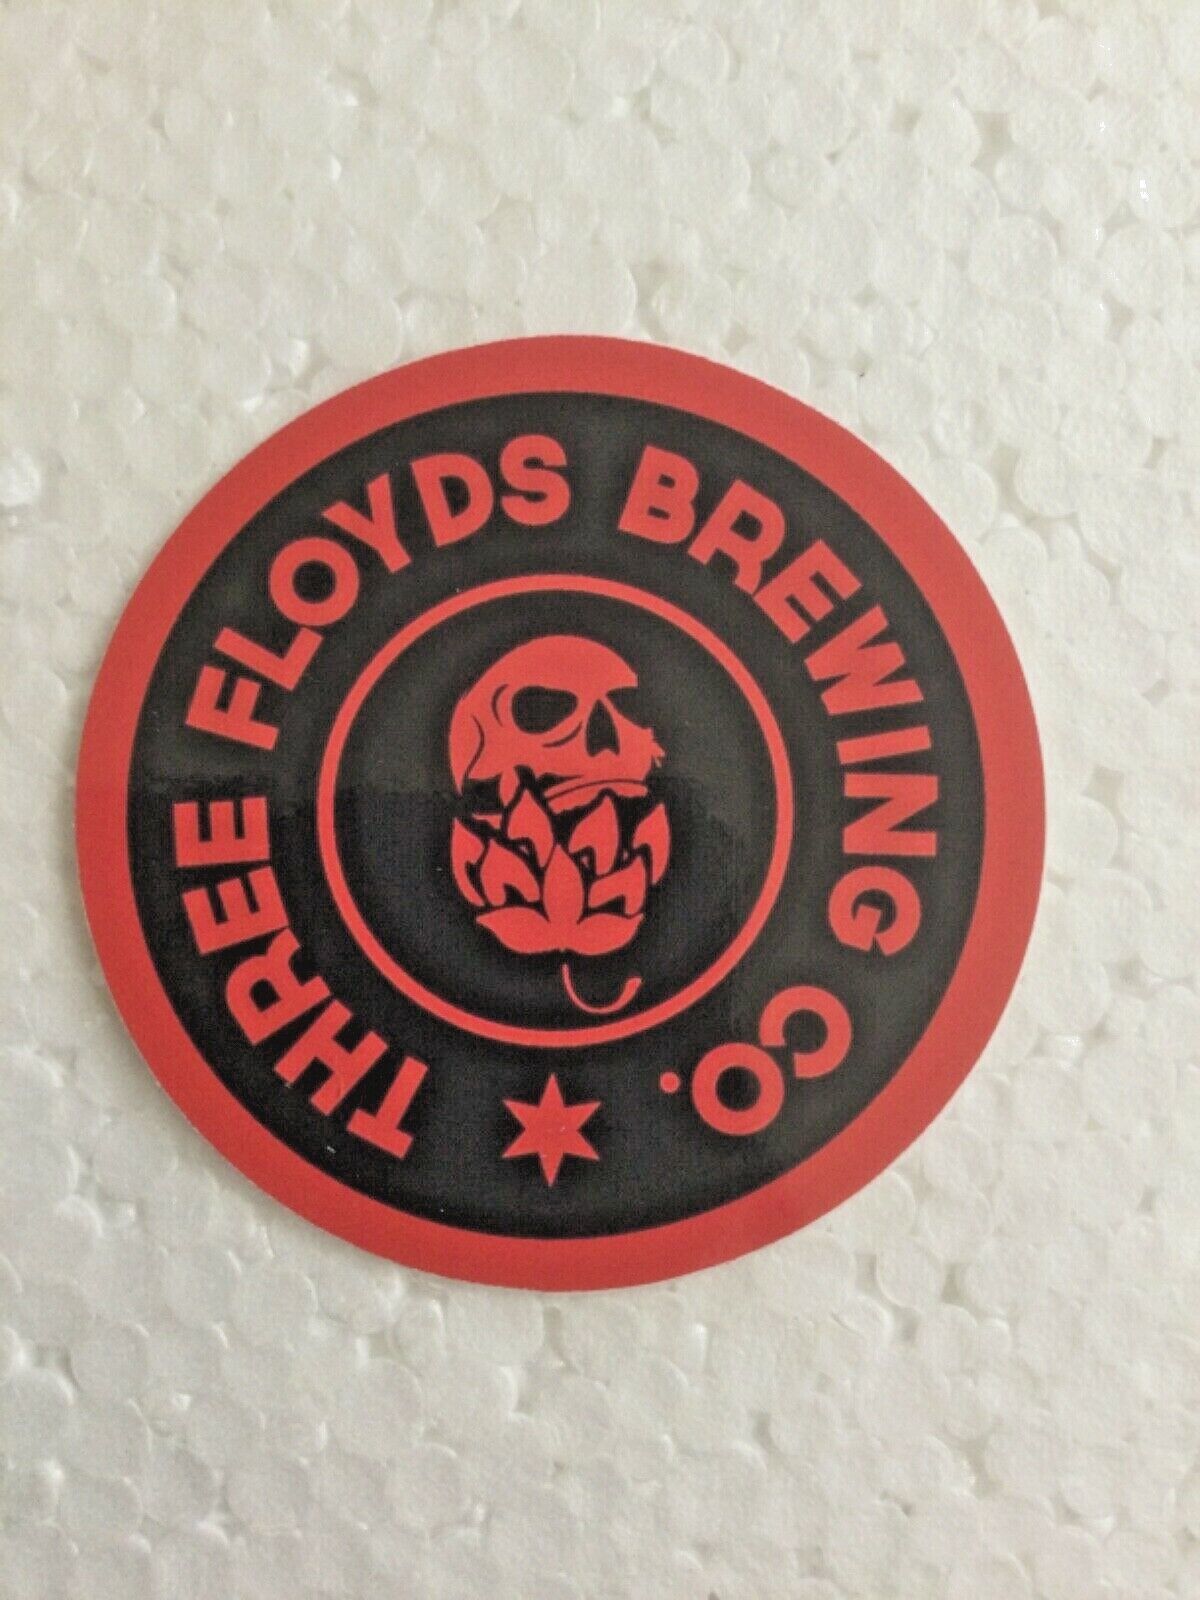 Three Floyds Brewing Company Brewery Beer Sticker Munster Indiana 